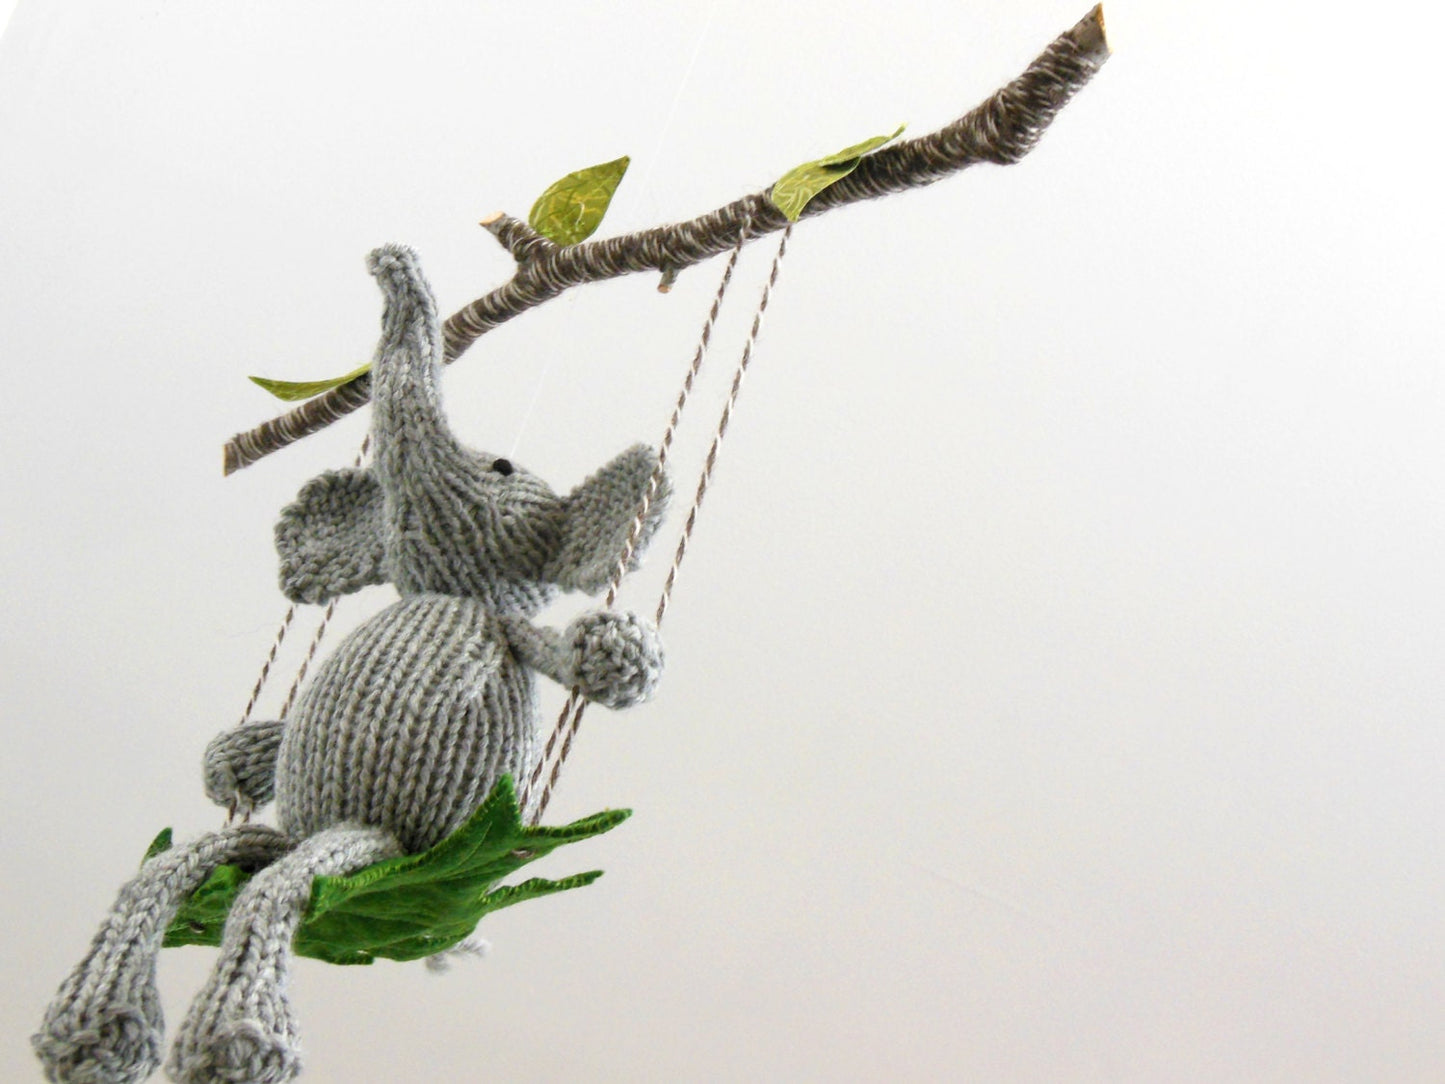 Large Knit Gray Elephant on a Swing Mobile